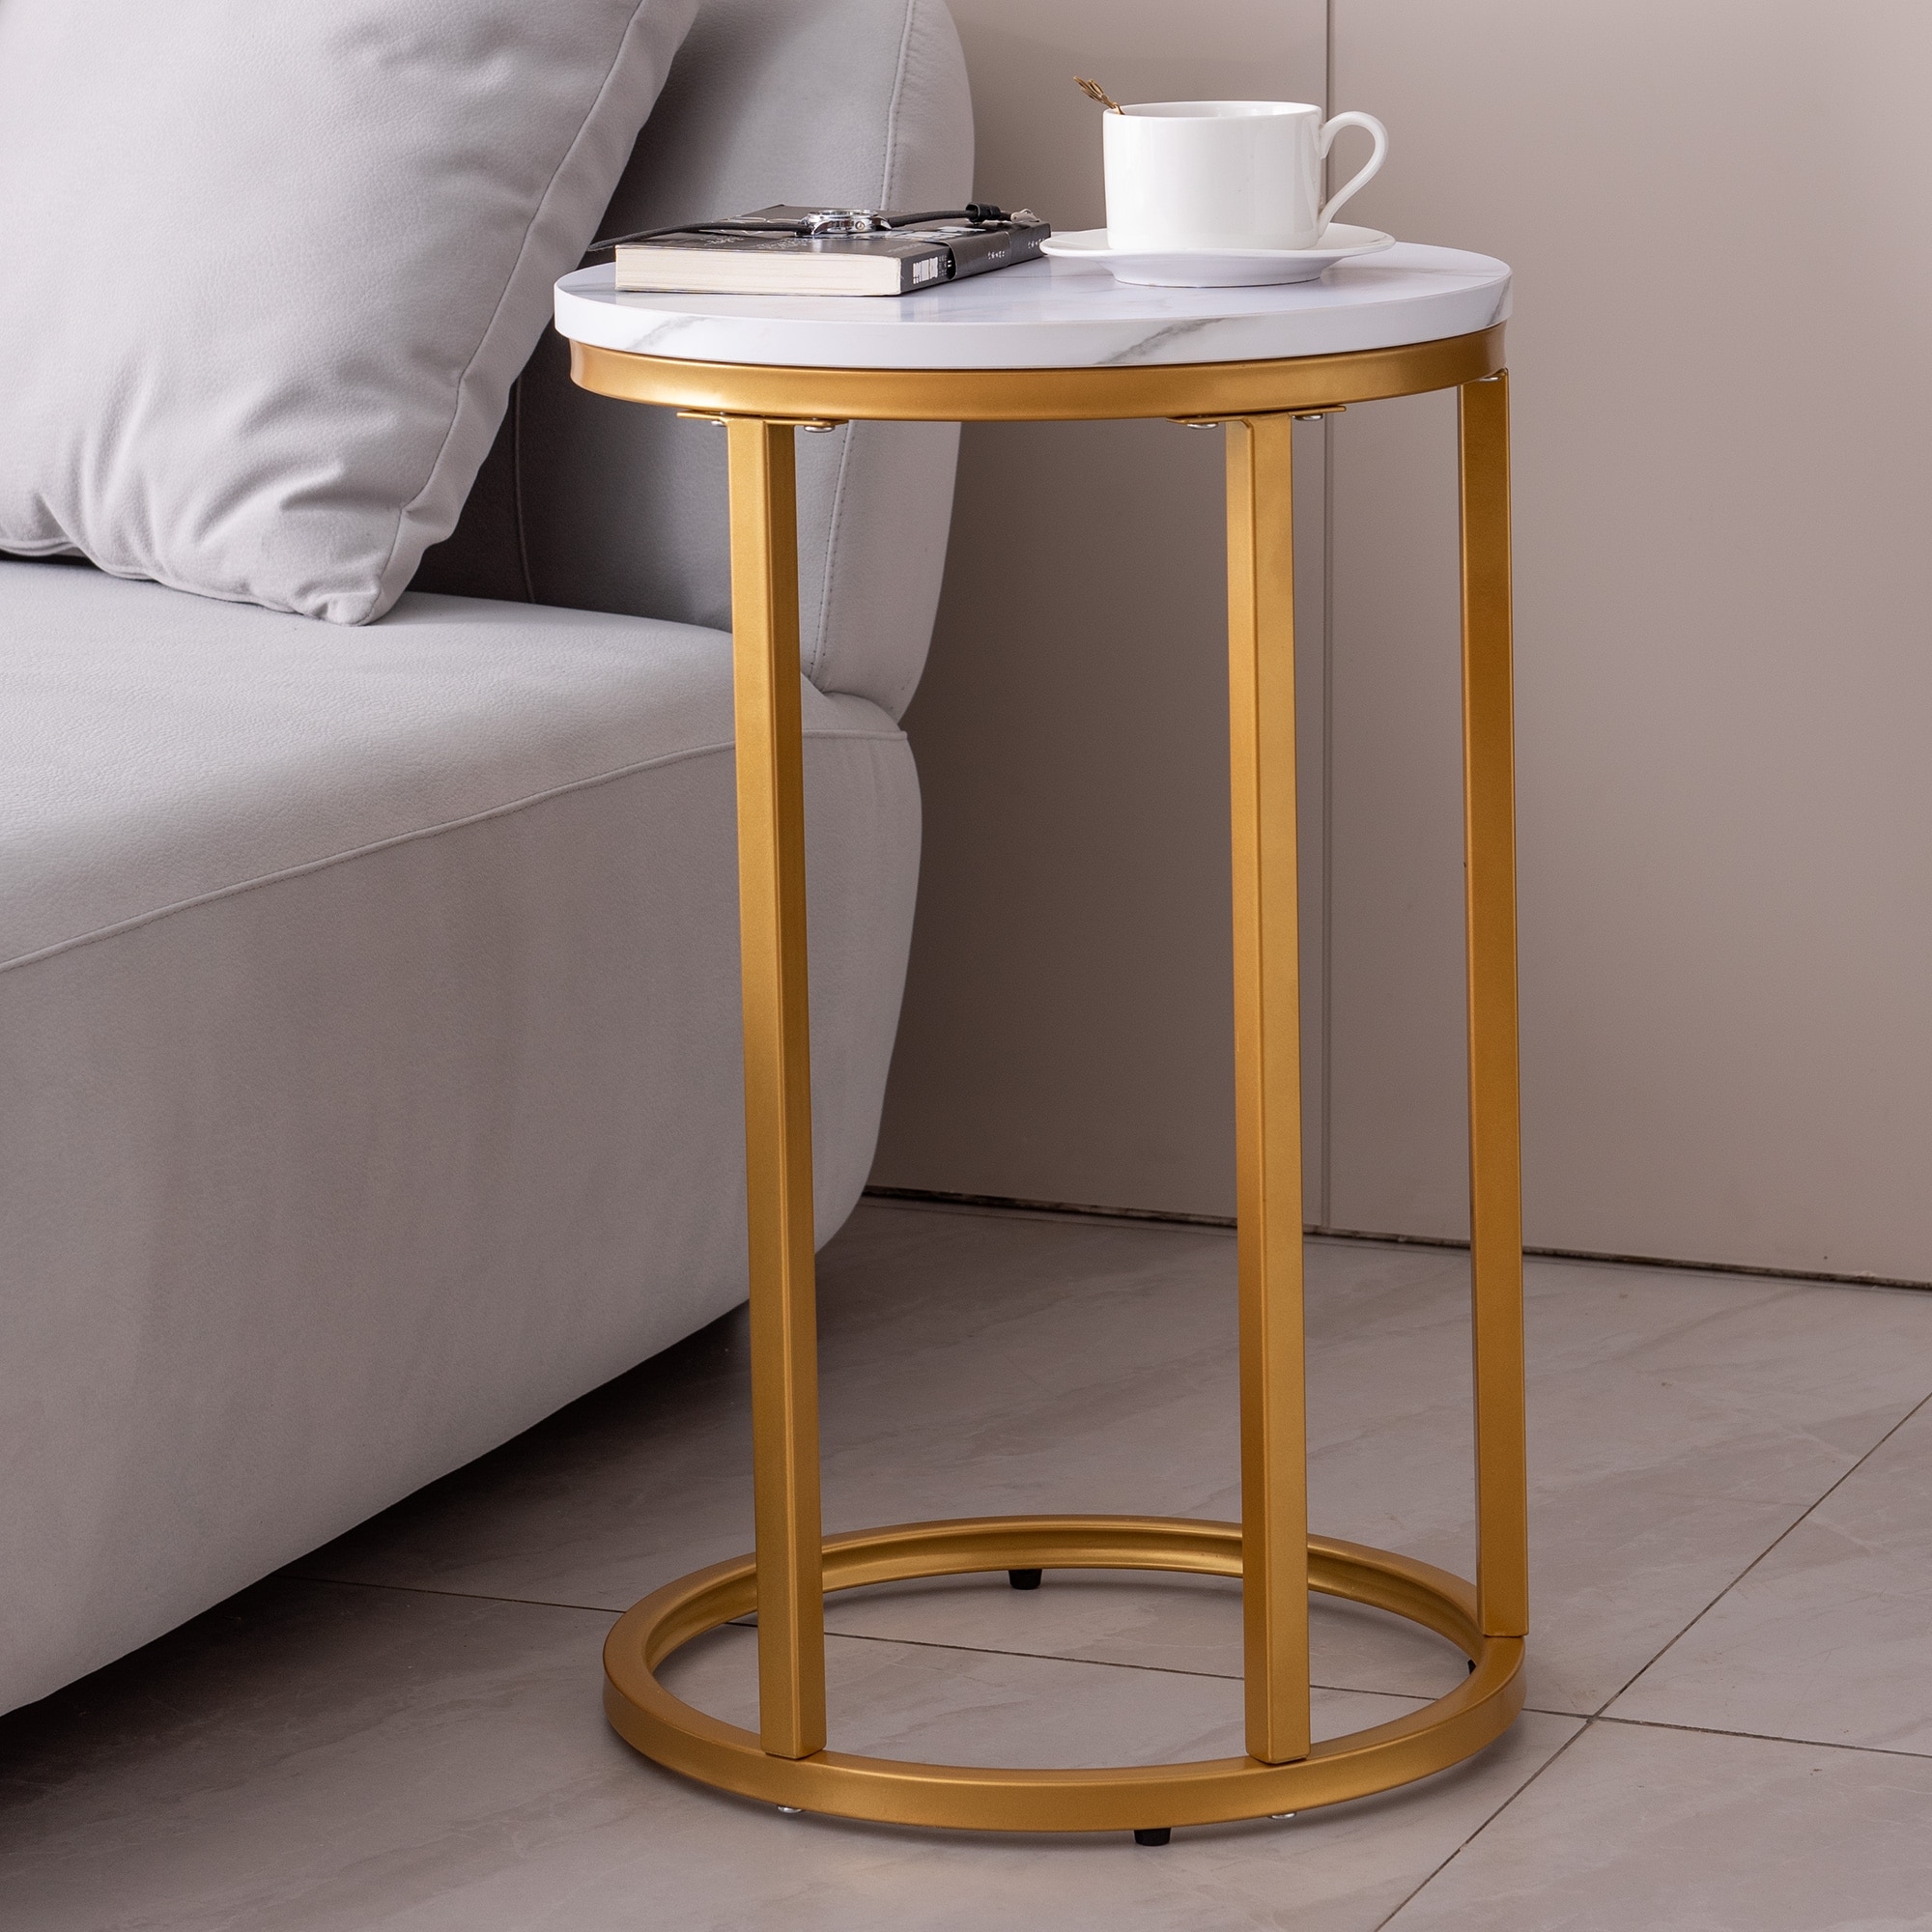 Modern C-Shaped End/Side Table,Golden Metal Frame With Round Marble Color Top-15.75" Coated Metal Legs,end Tables